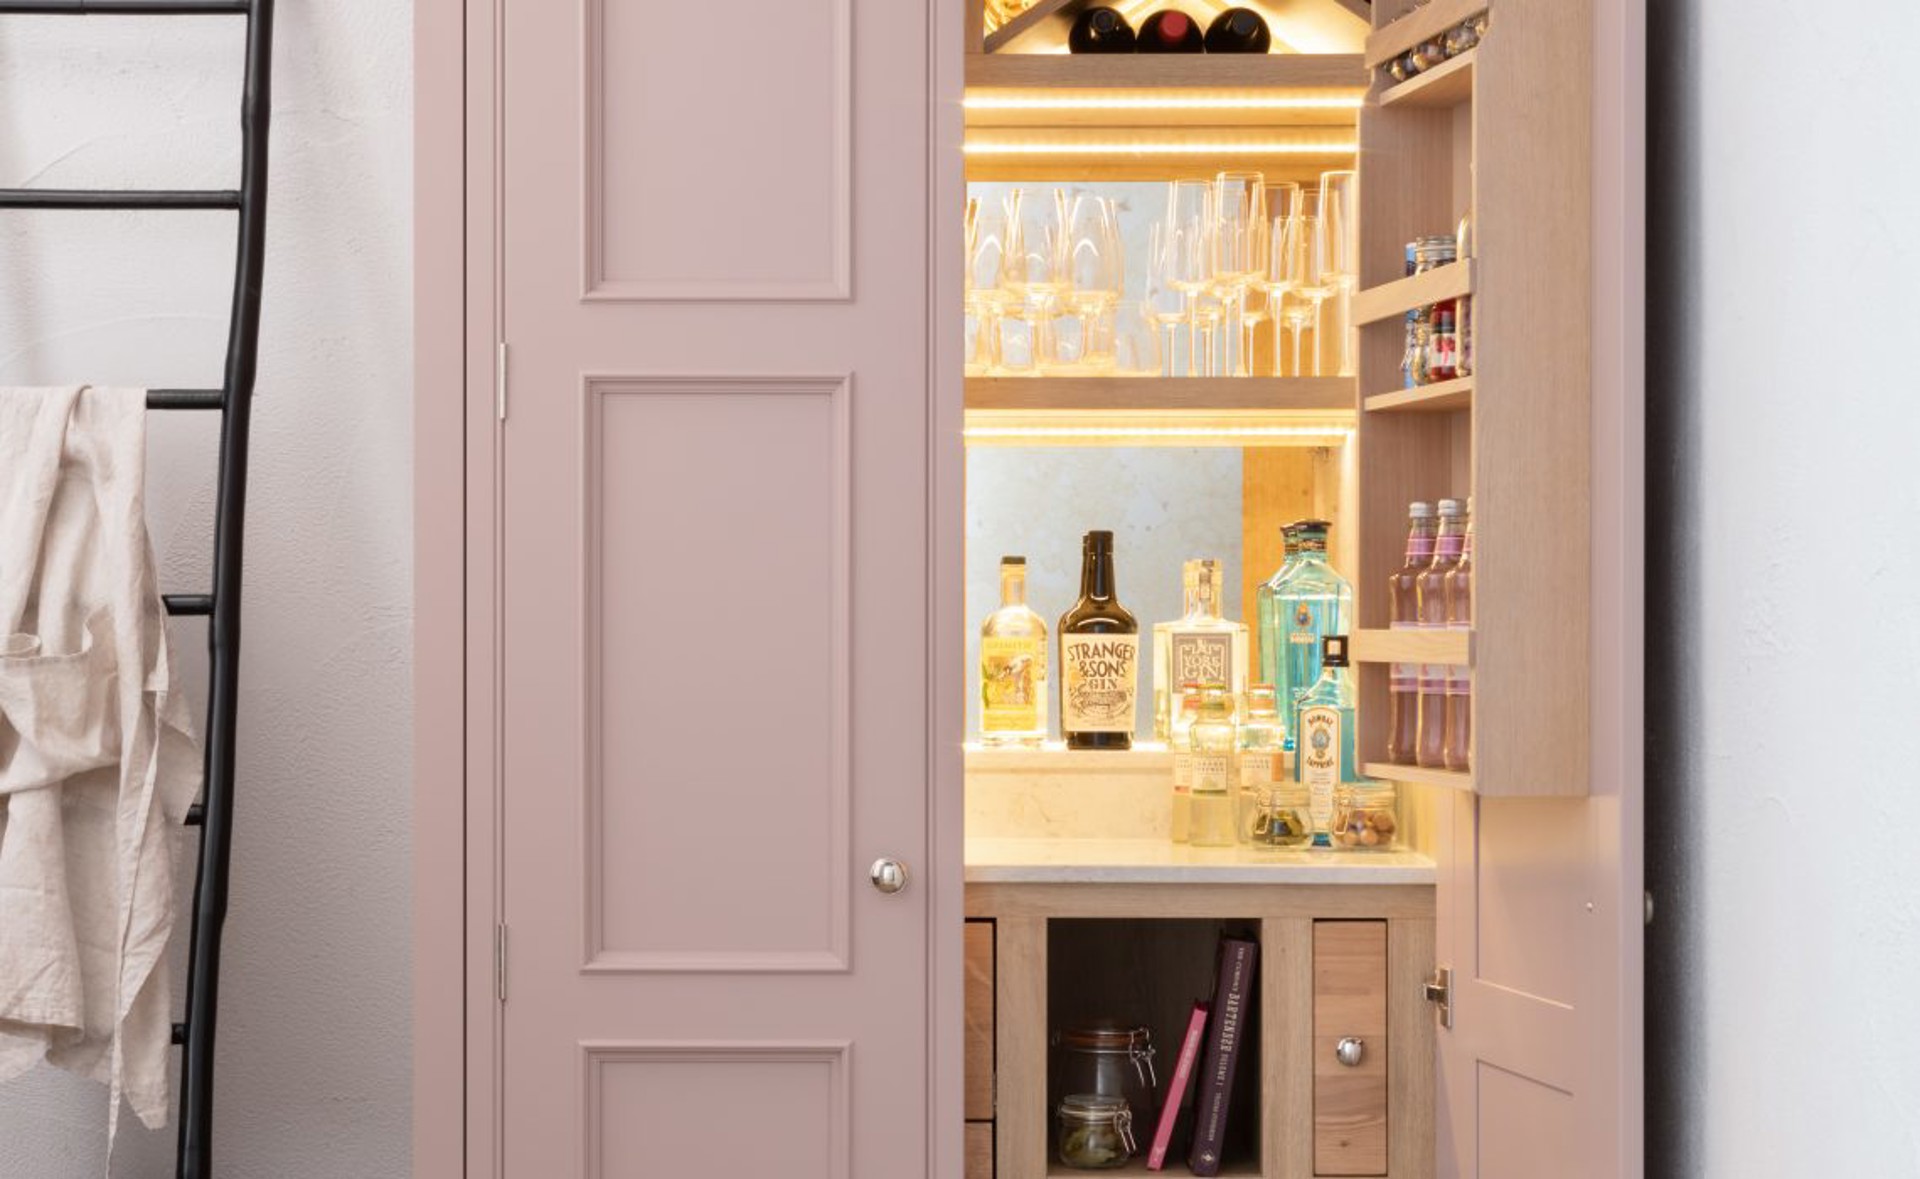 Introducing the 1909 Gin Cabinet - the perfect home bar